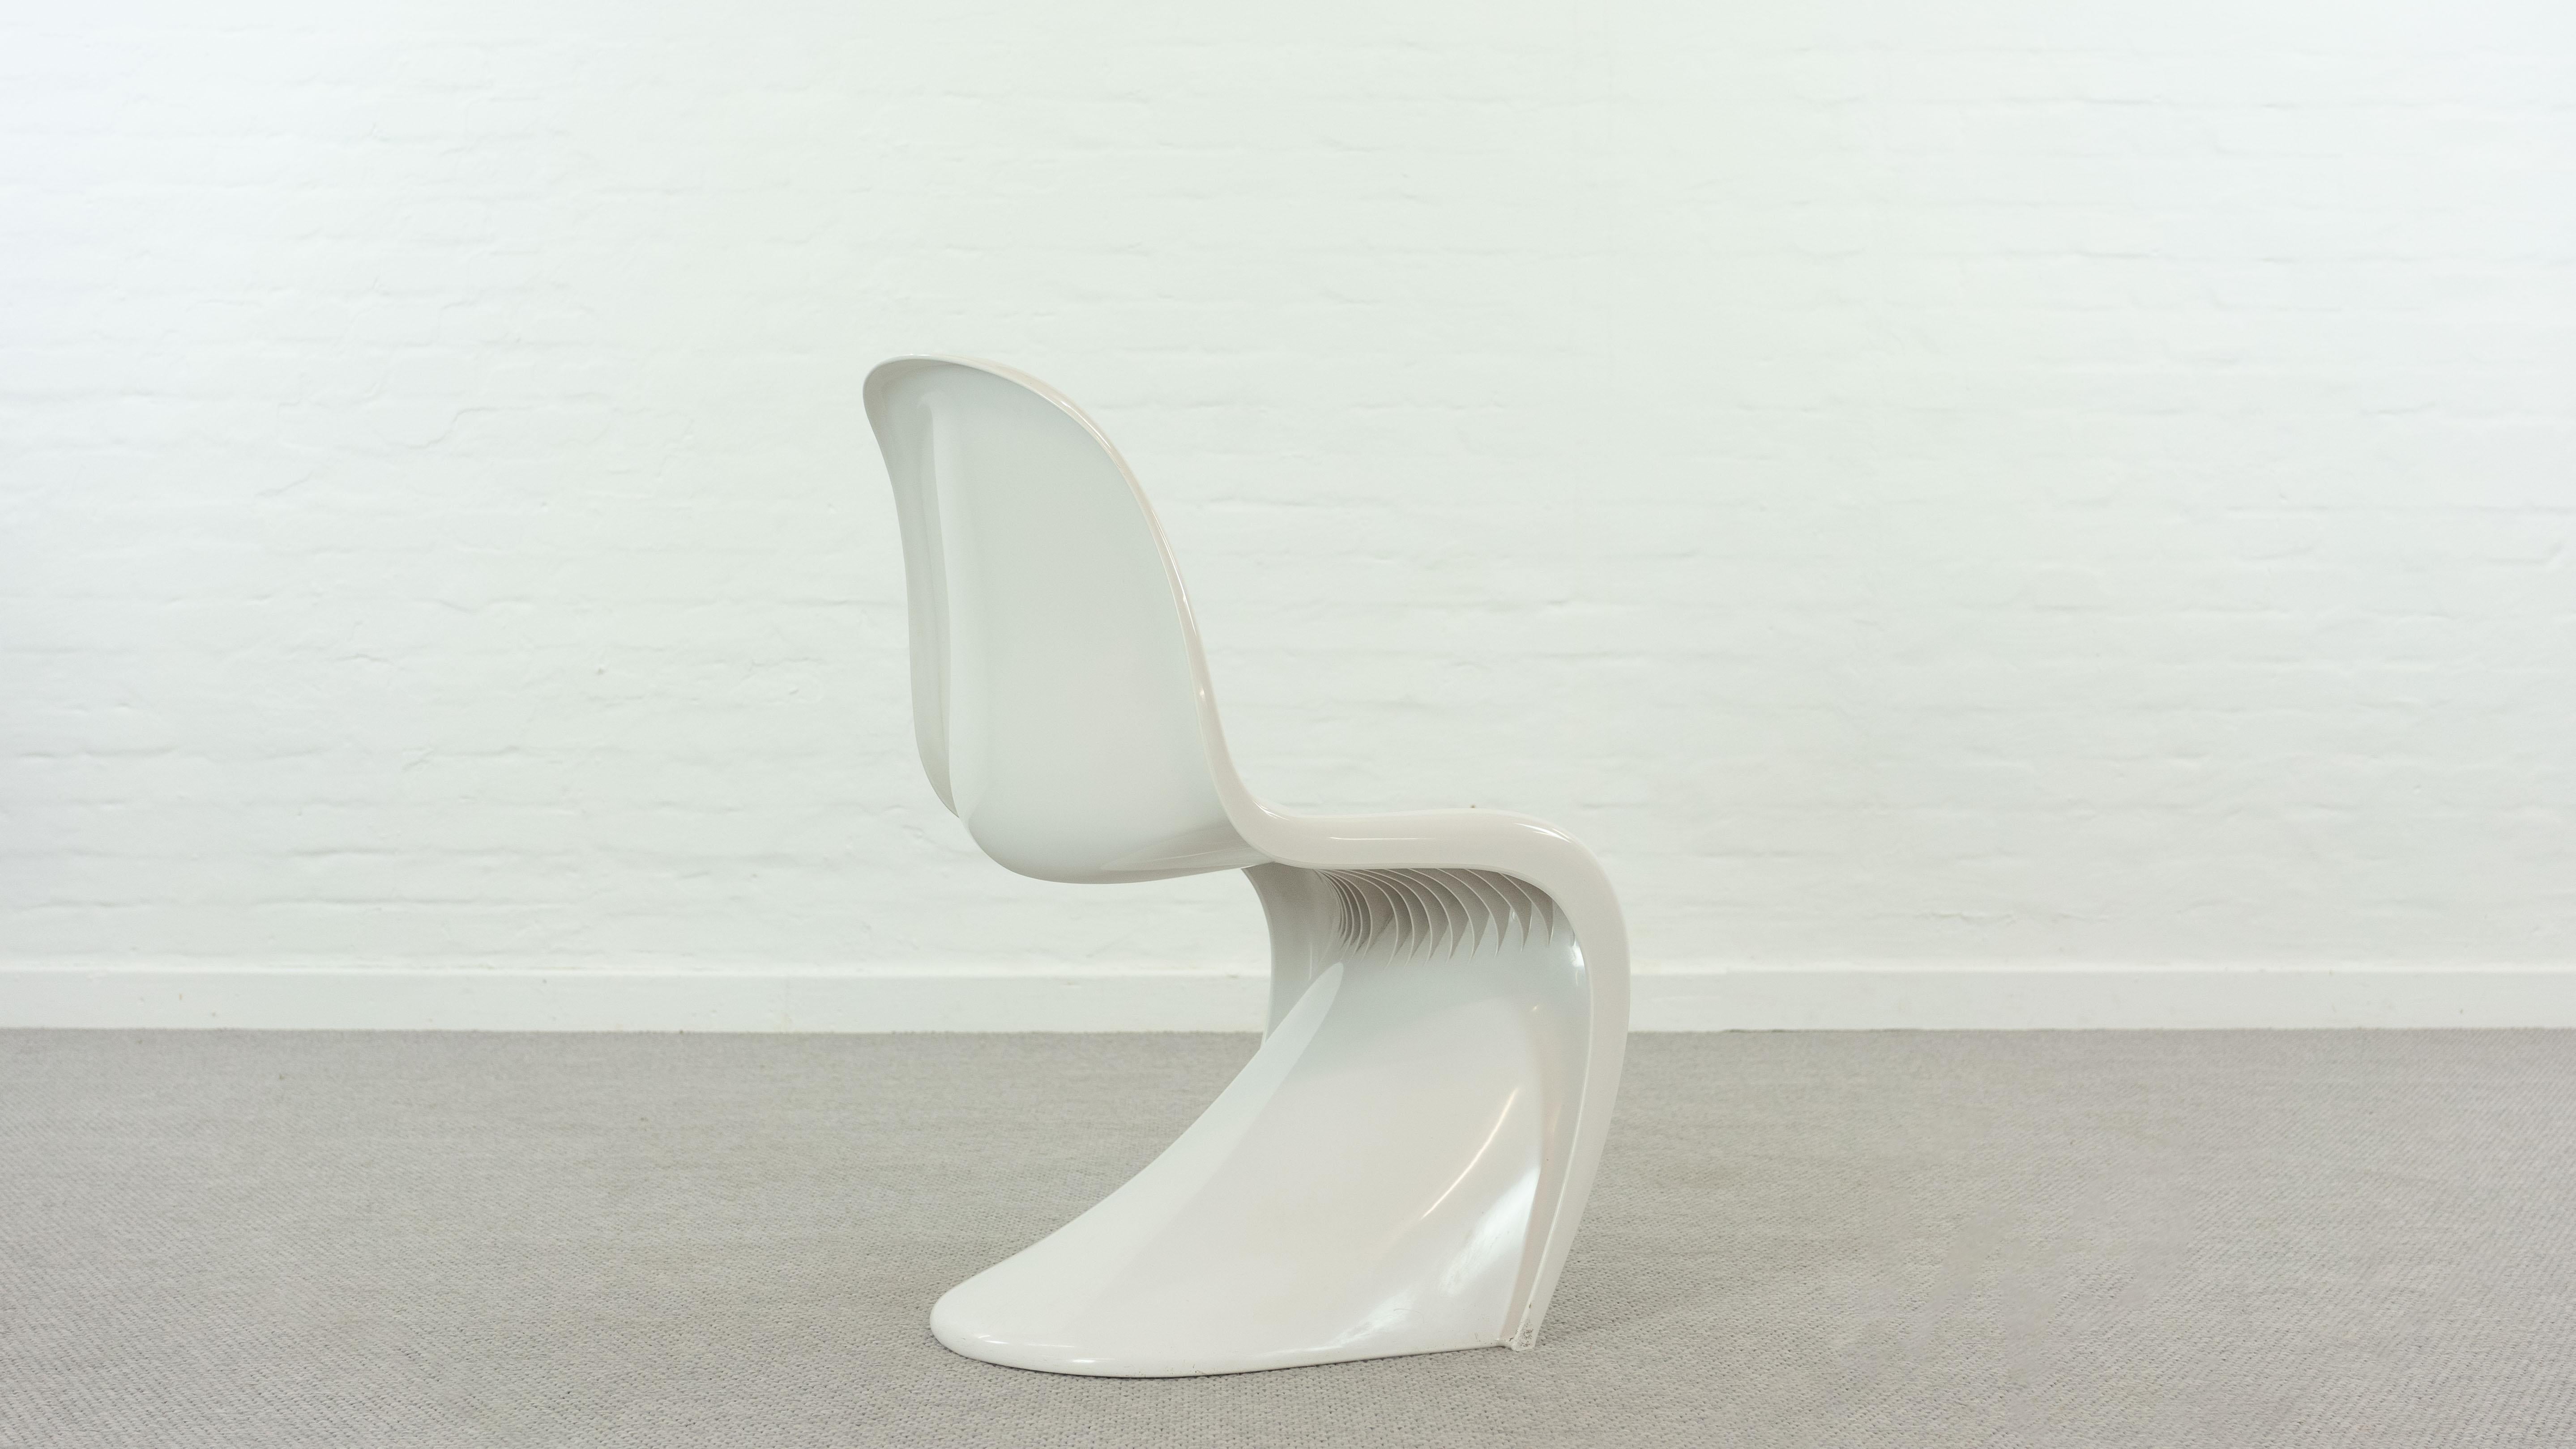 Late 20th Century Panton Chair by Verner Panton for Herman Miller / Fehlbaum, in white 1976 For Sale